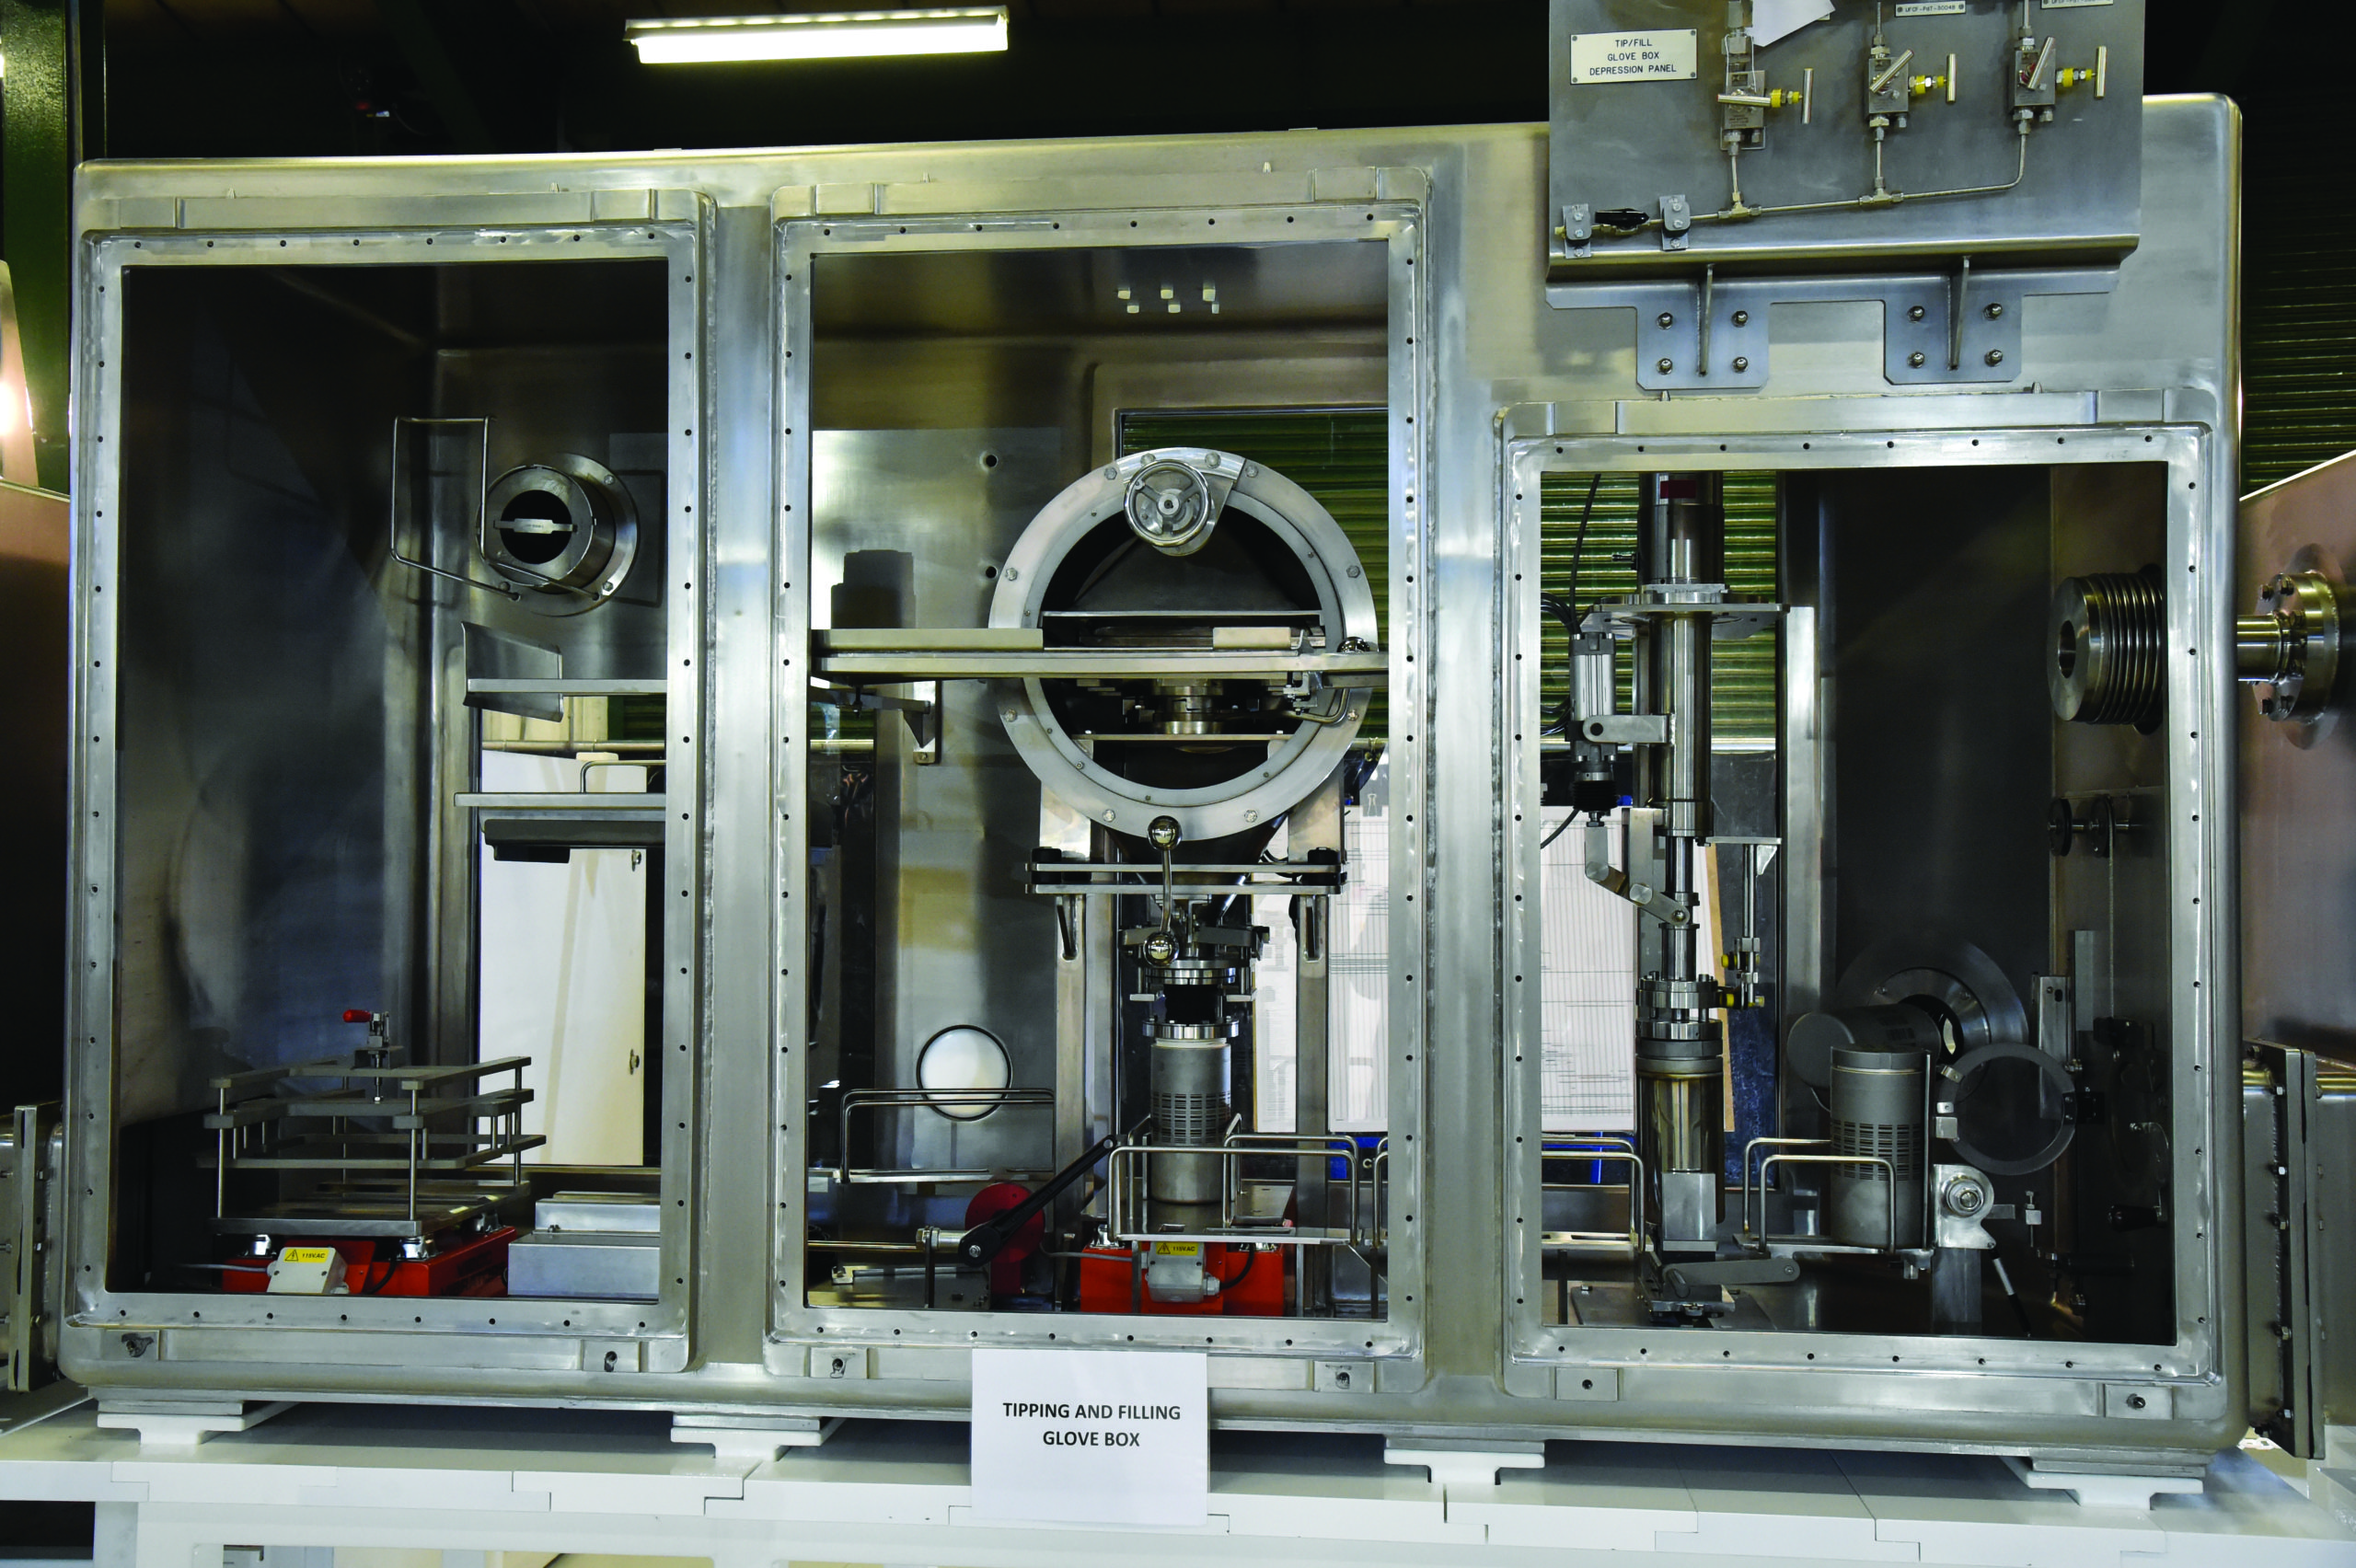 Un-irradiated fuel characterisation facility (UFCF)